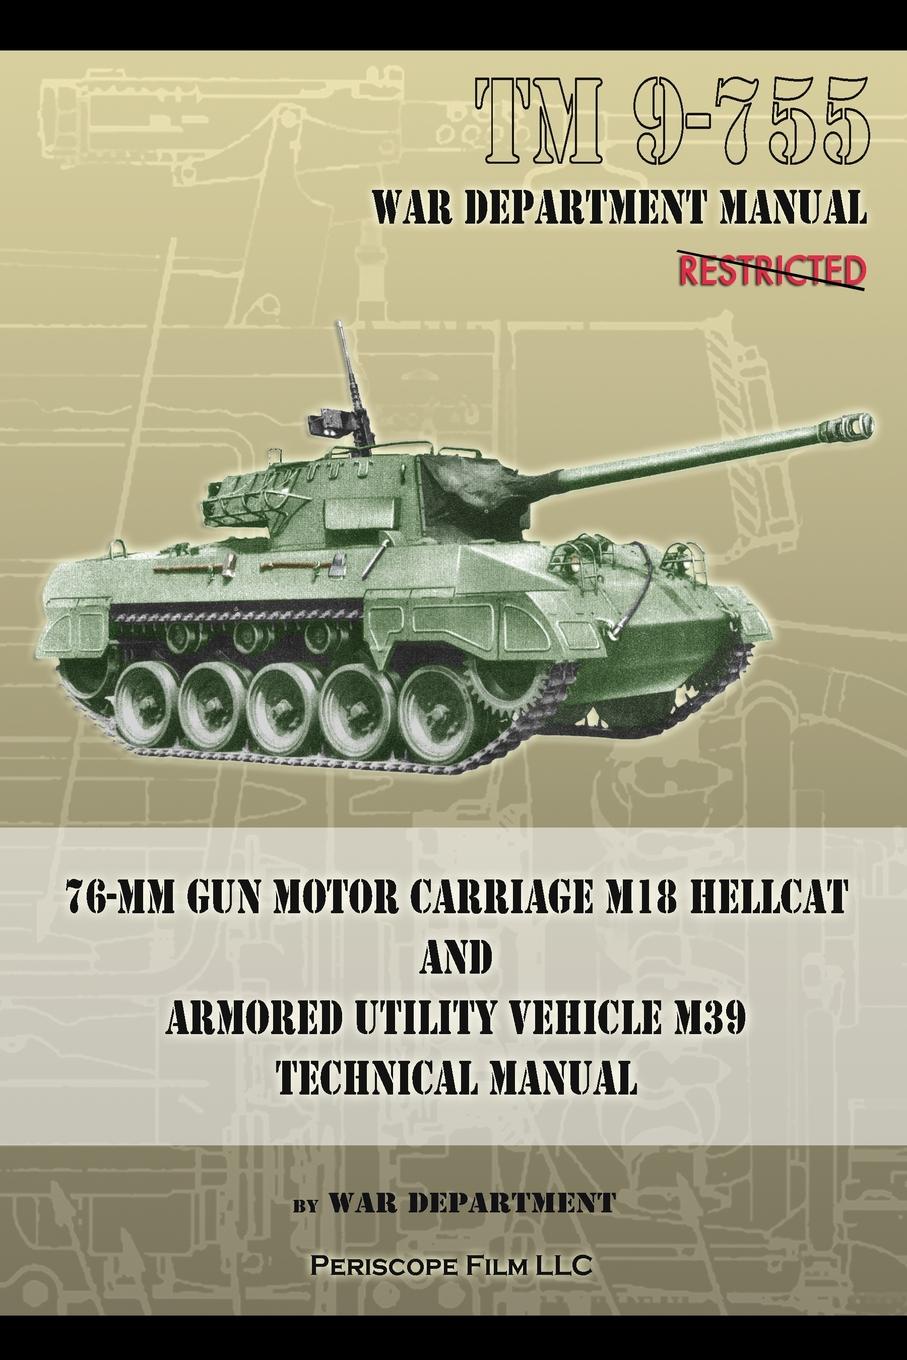 TM 9-755 76-mm Gun Motor Carriage M18 Hellcat and Armored Utility Vehicle M39